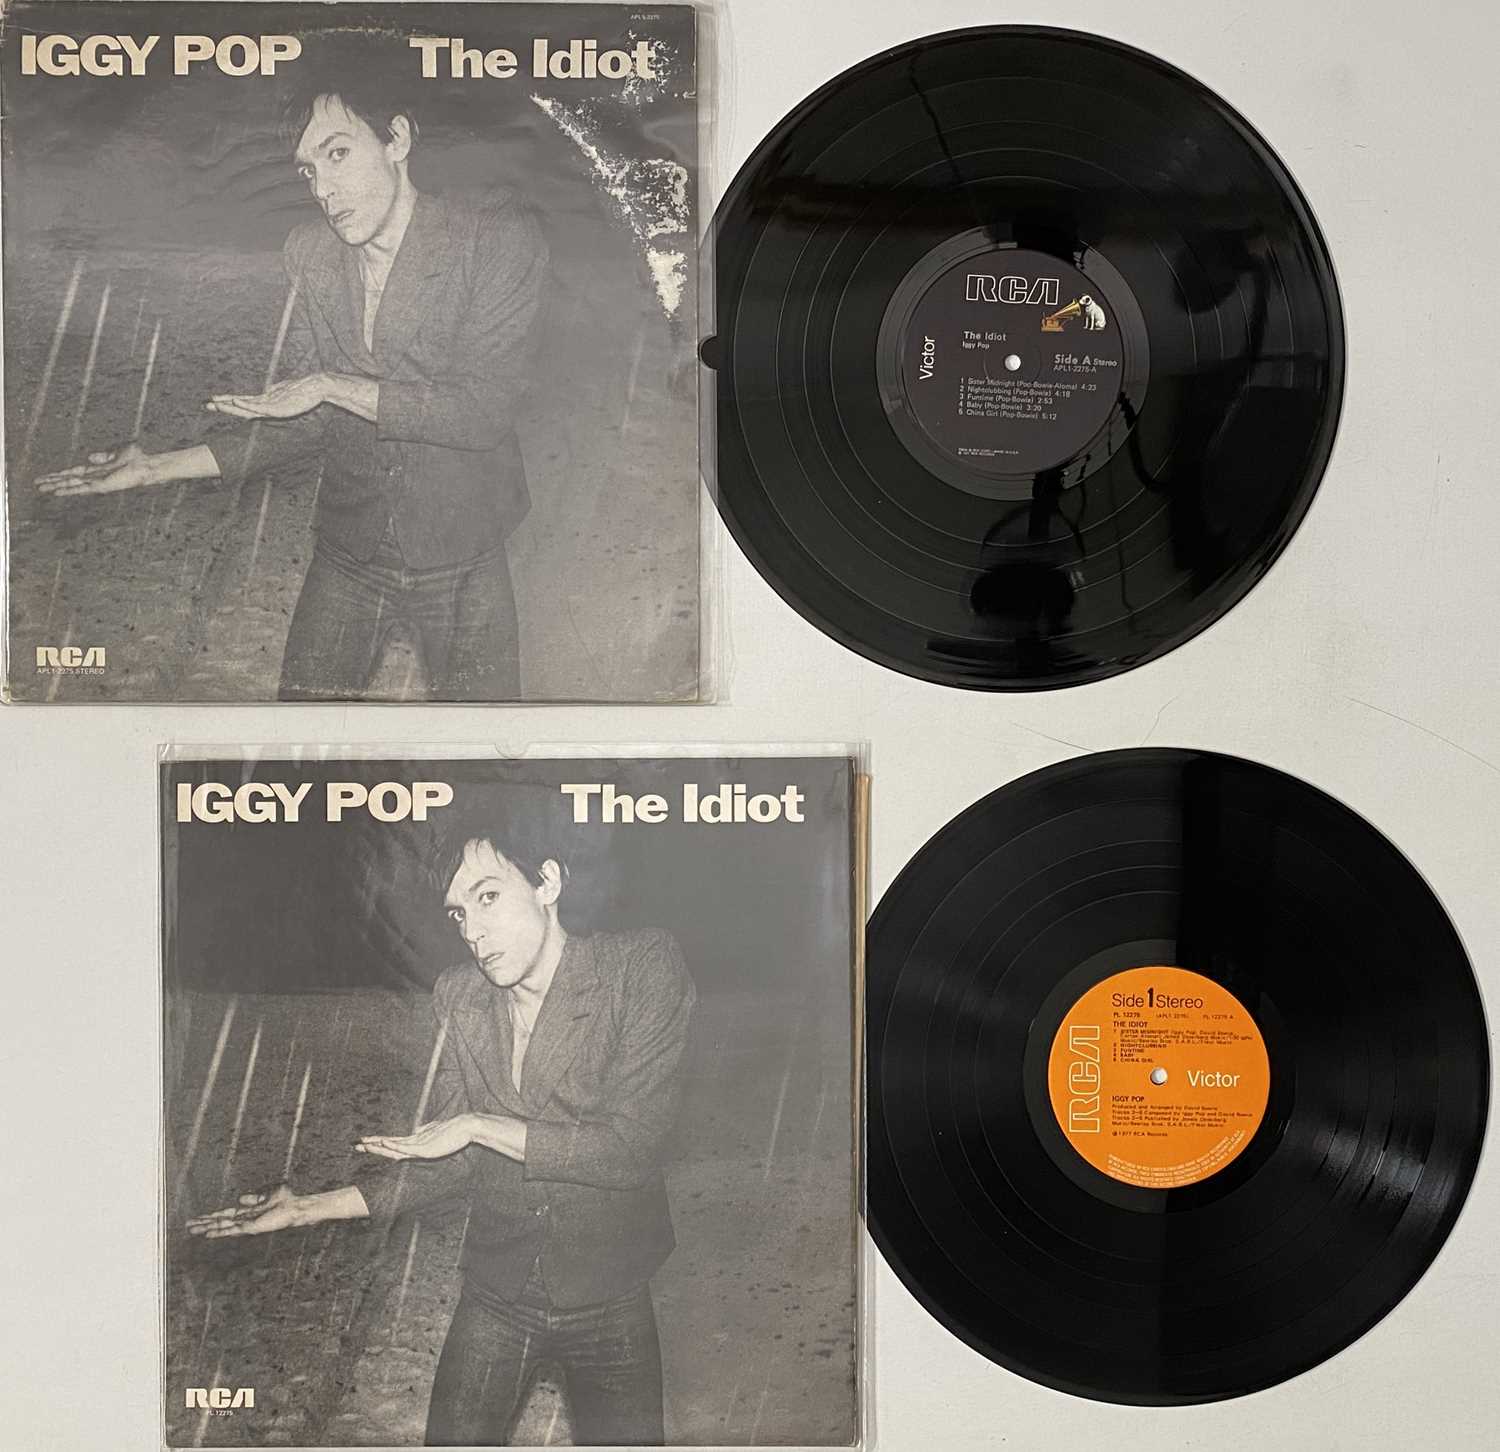 IGGY POP - LP COLLECTION - Image 3 of 5